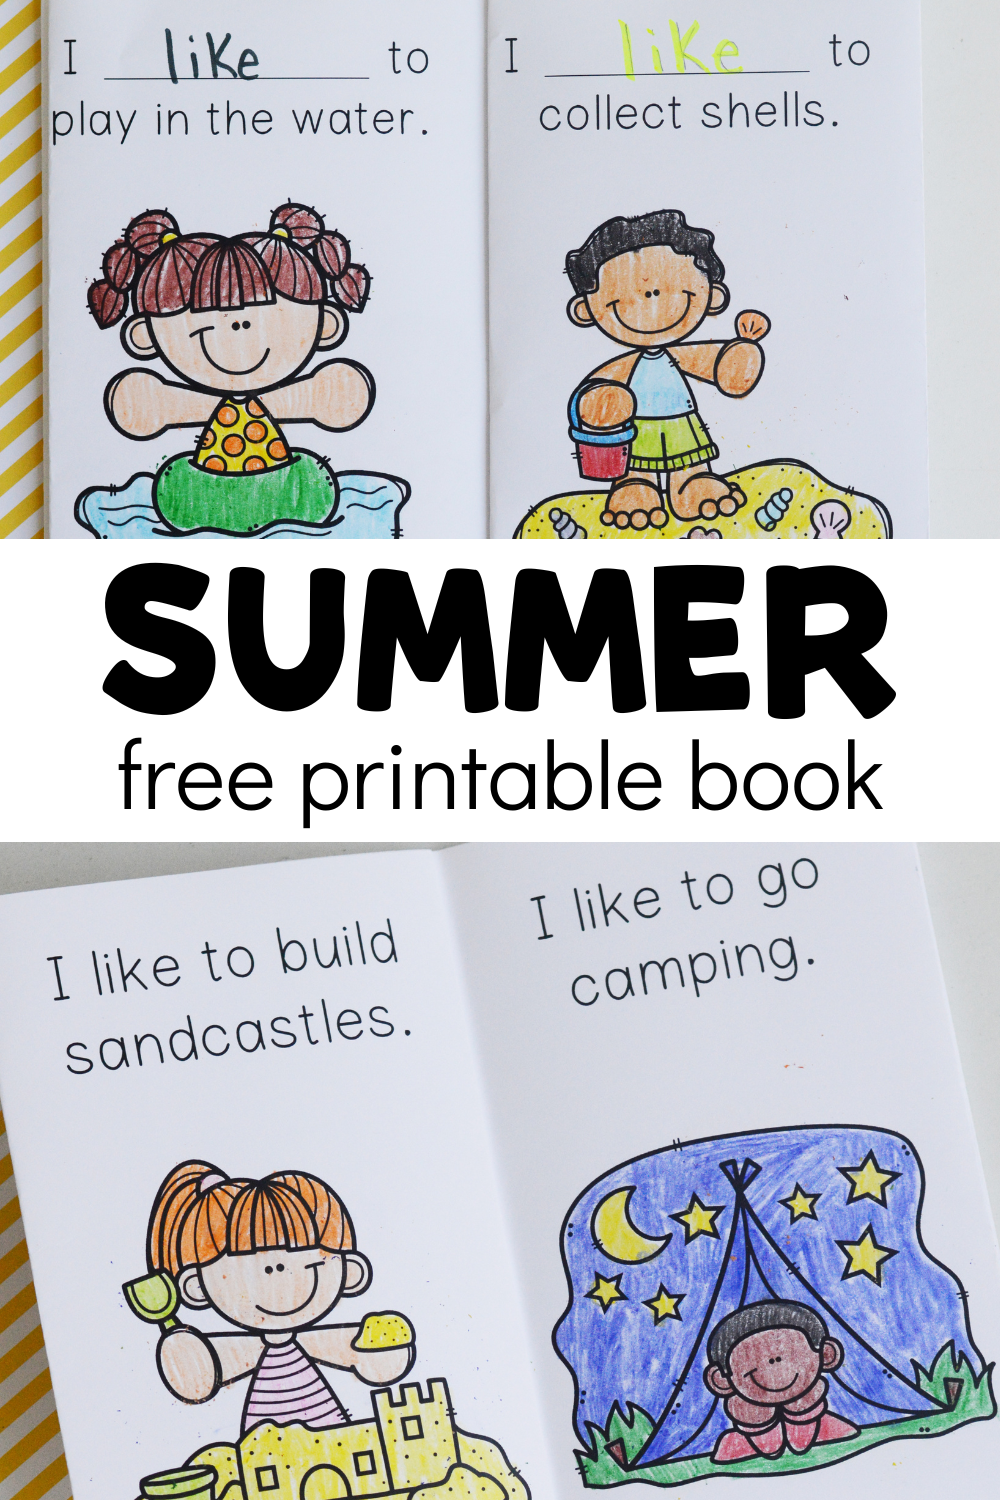 pages from emergent reader with text that reads summer free printable book